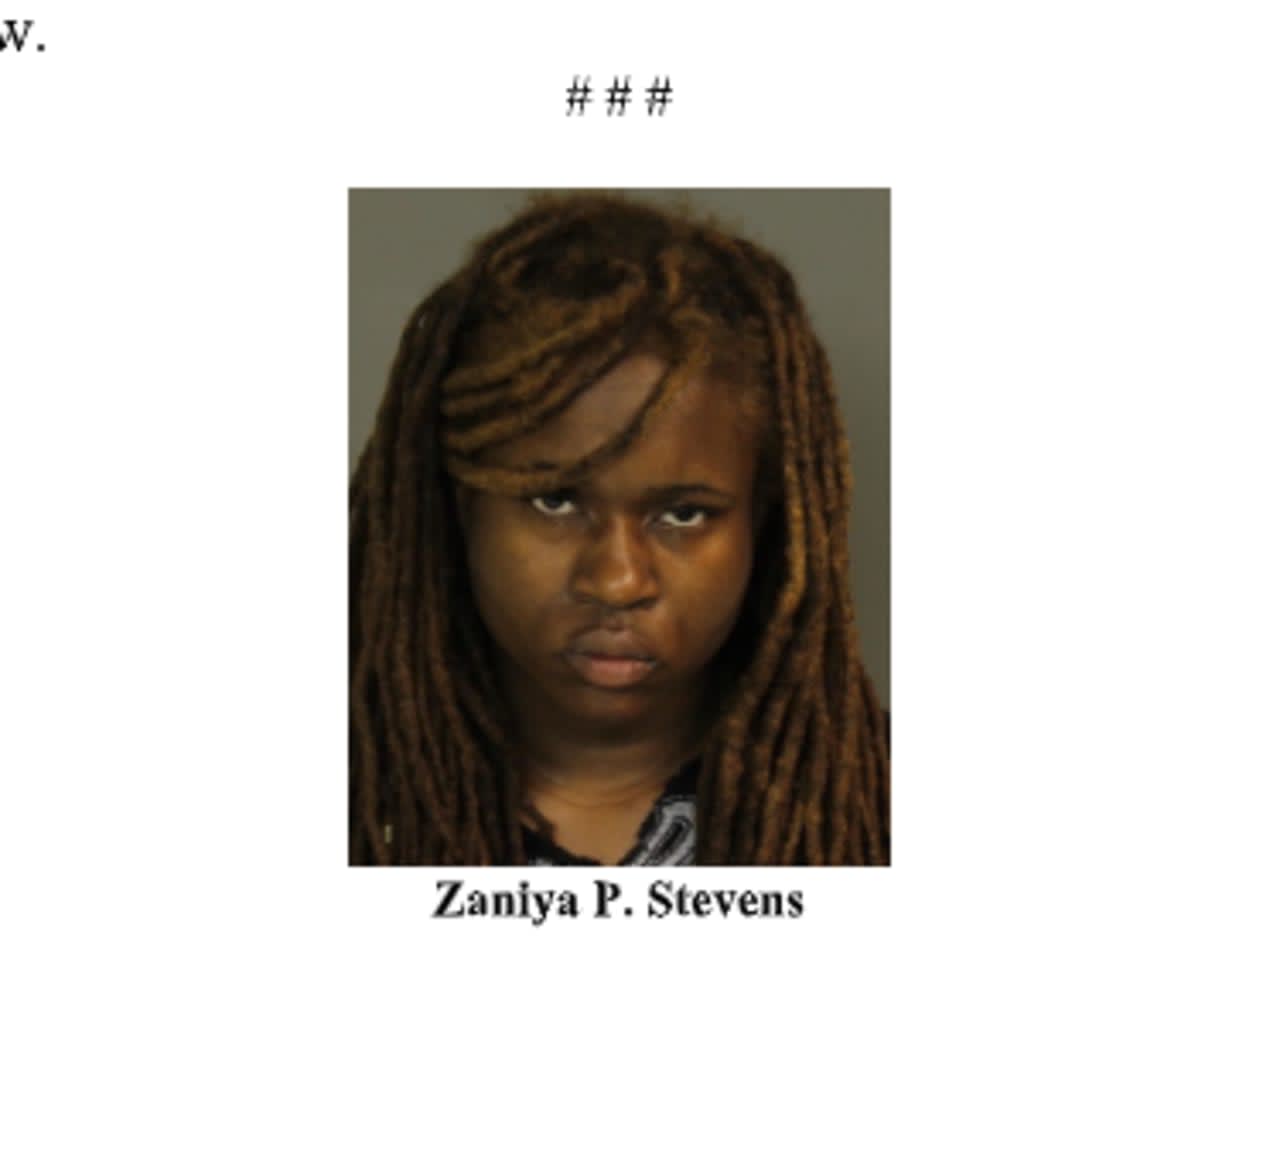 Zaniya Stevens, 23, faces assault and weapons charges.